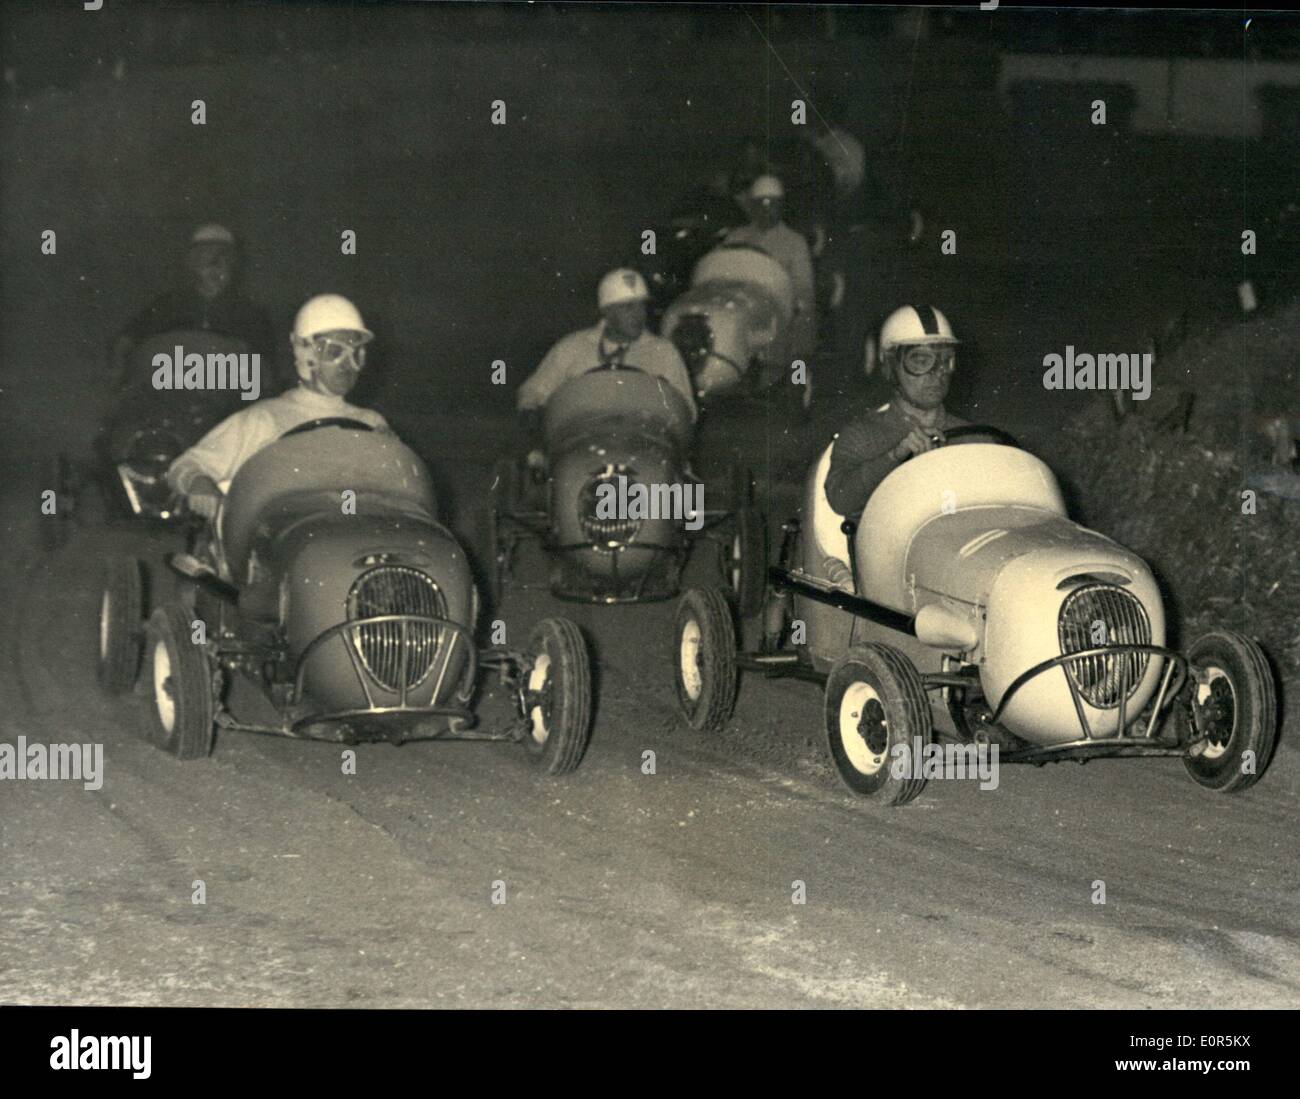 Apr. 04, 1958 - Famous racers in Midget cars Race: Specially built Midget cars where used by some of the famous french racers in a race held at the palais Des sports, Paris,last night. vent was organized for the benefit of retired racers? Photo shows An incident of the Race. Stock Photo